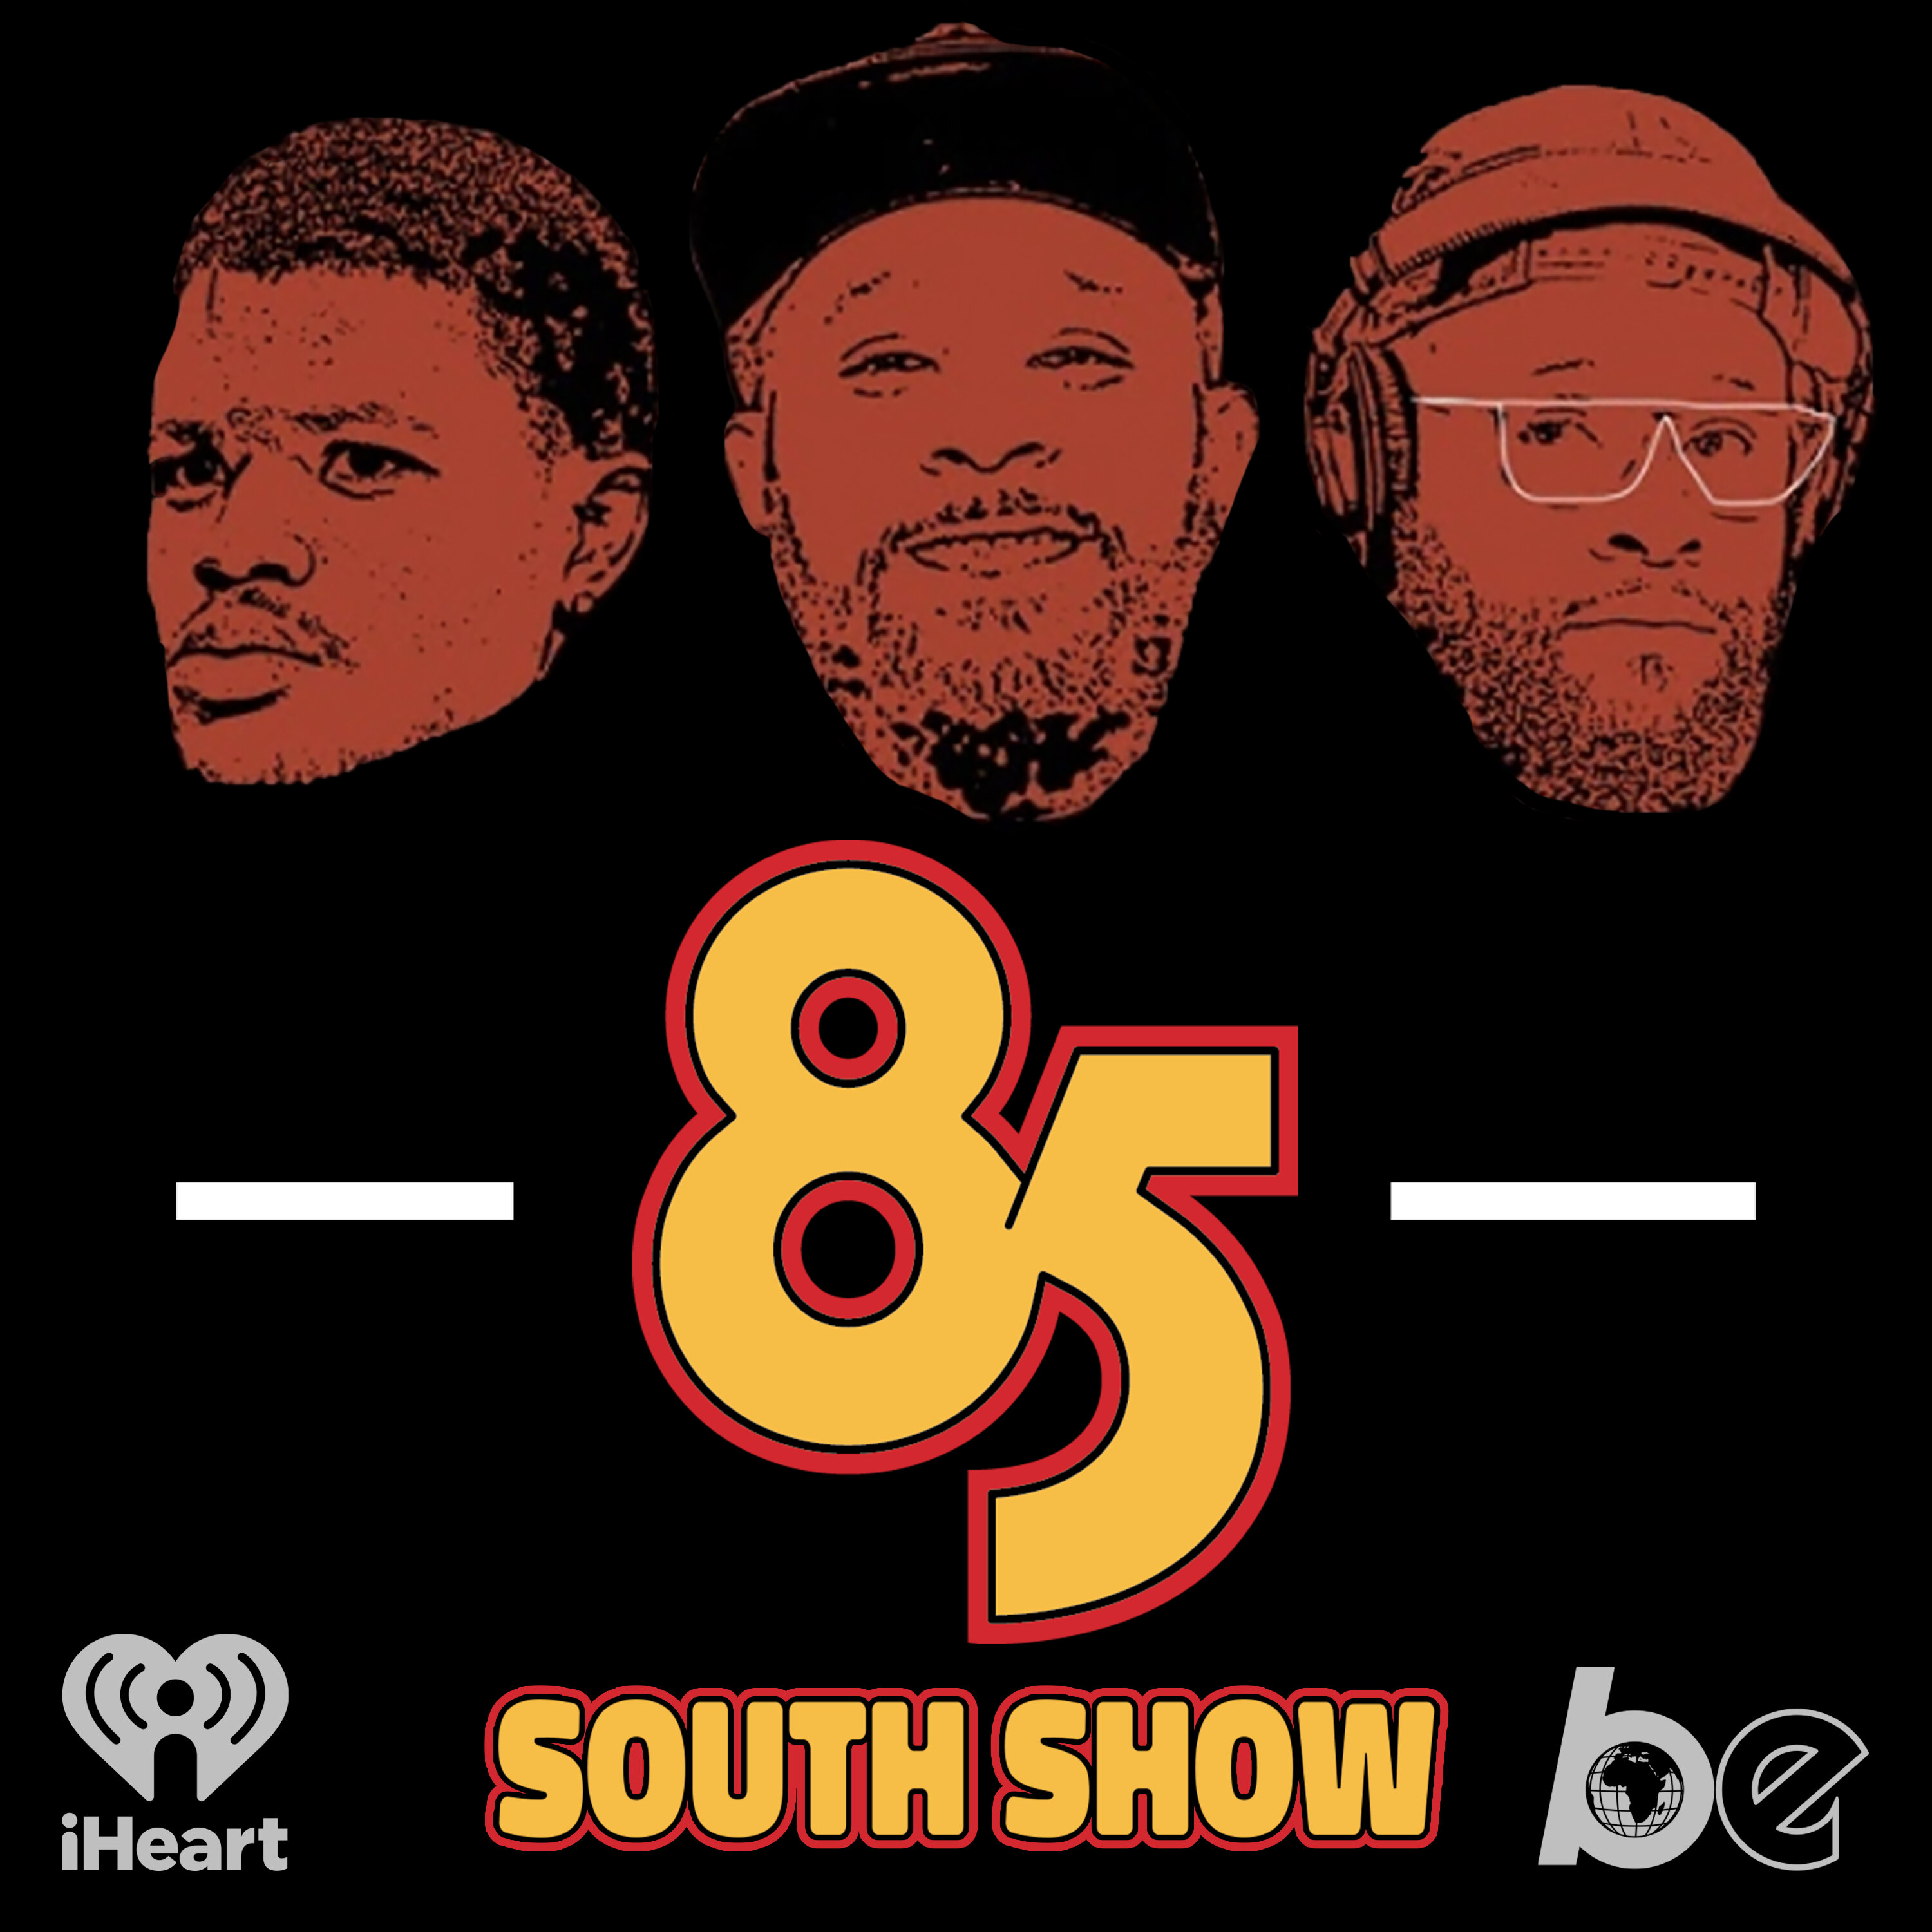 Cheating A$$ Myron in the Trap  | The 85 South Show